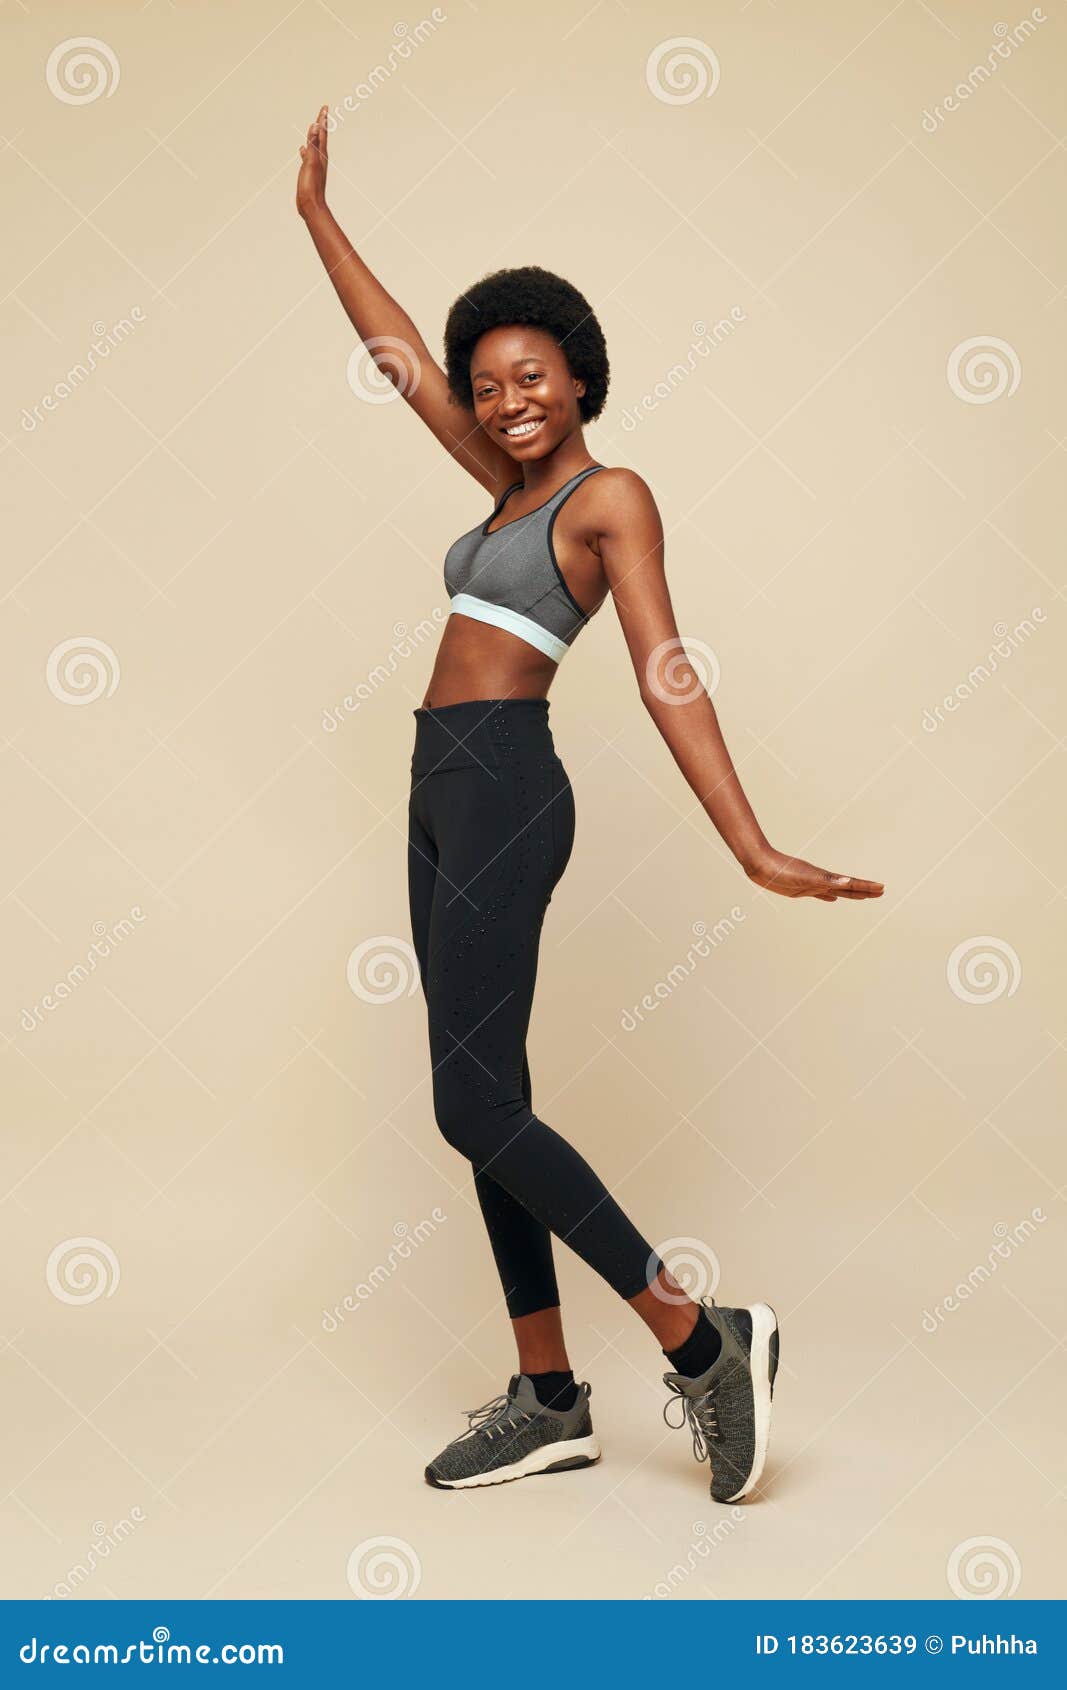 Beautiful toned muscular fitness body of happy smiling African